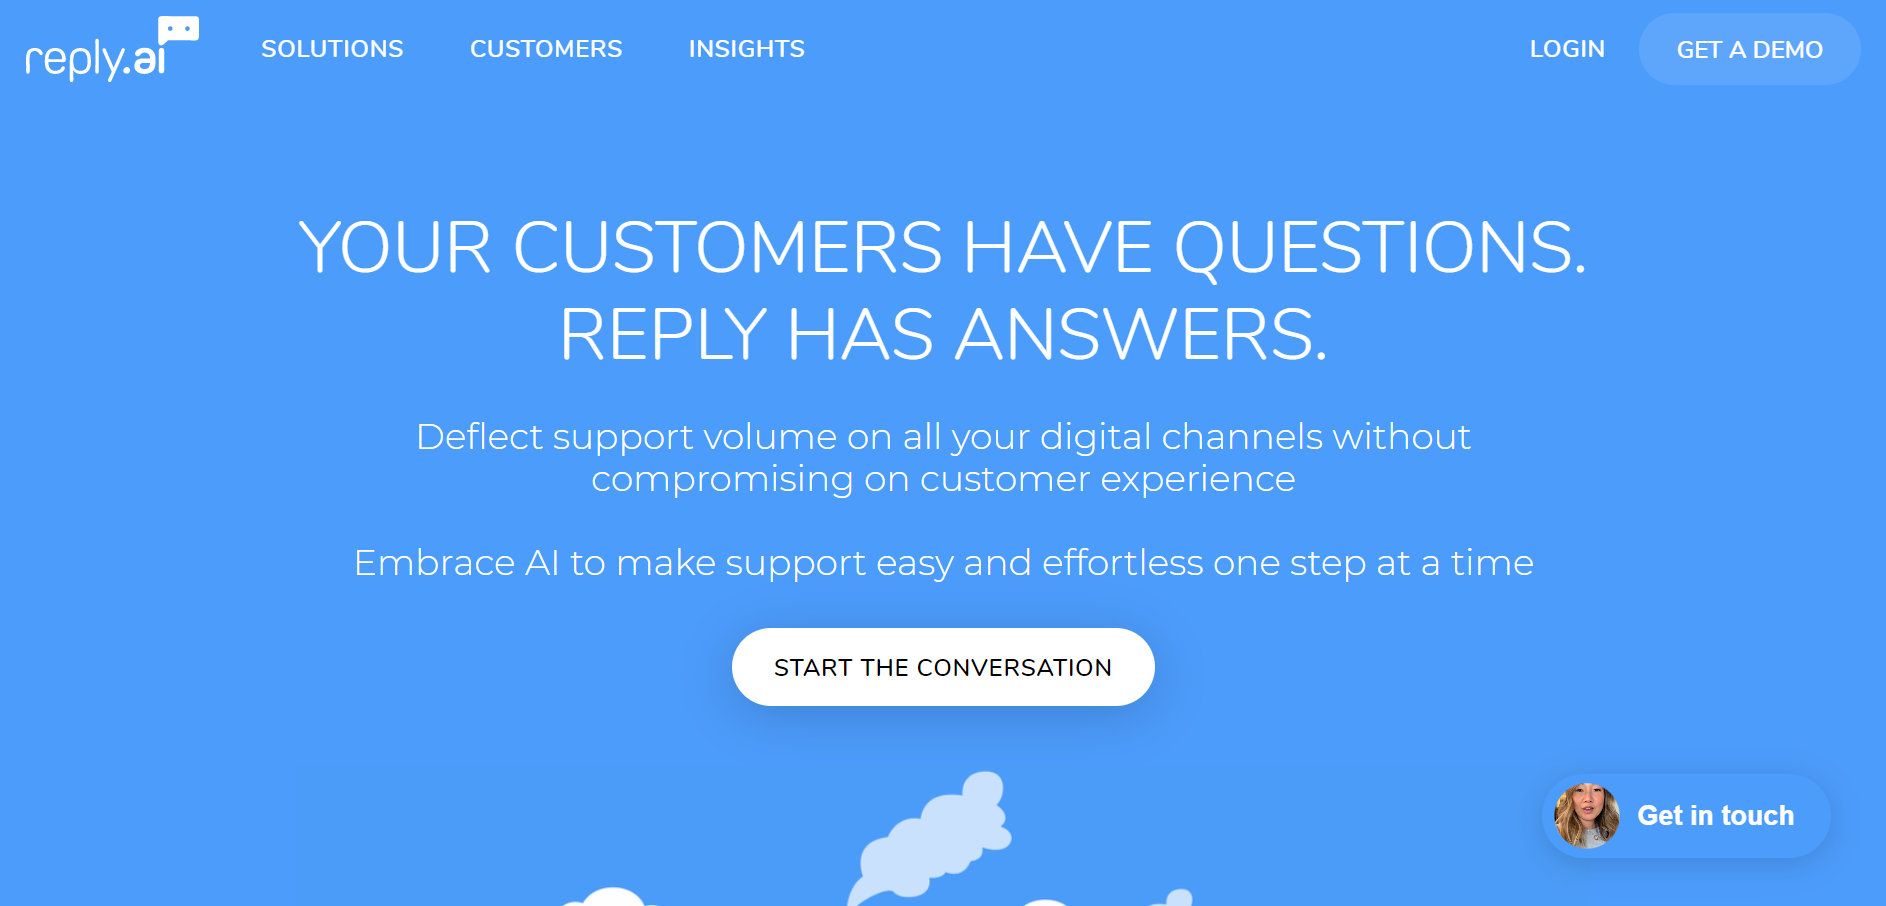 best ecommerce chatbot tools - Reply.ai